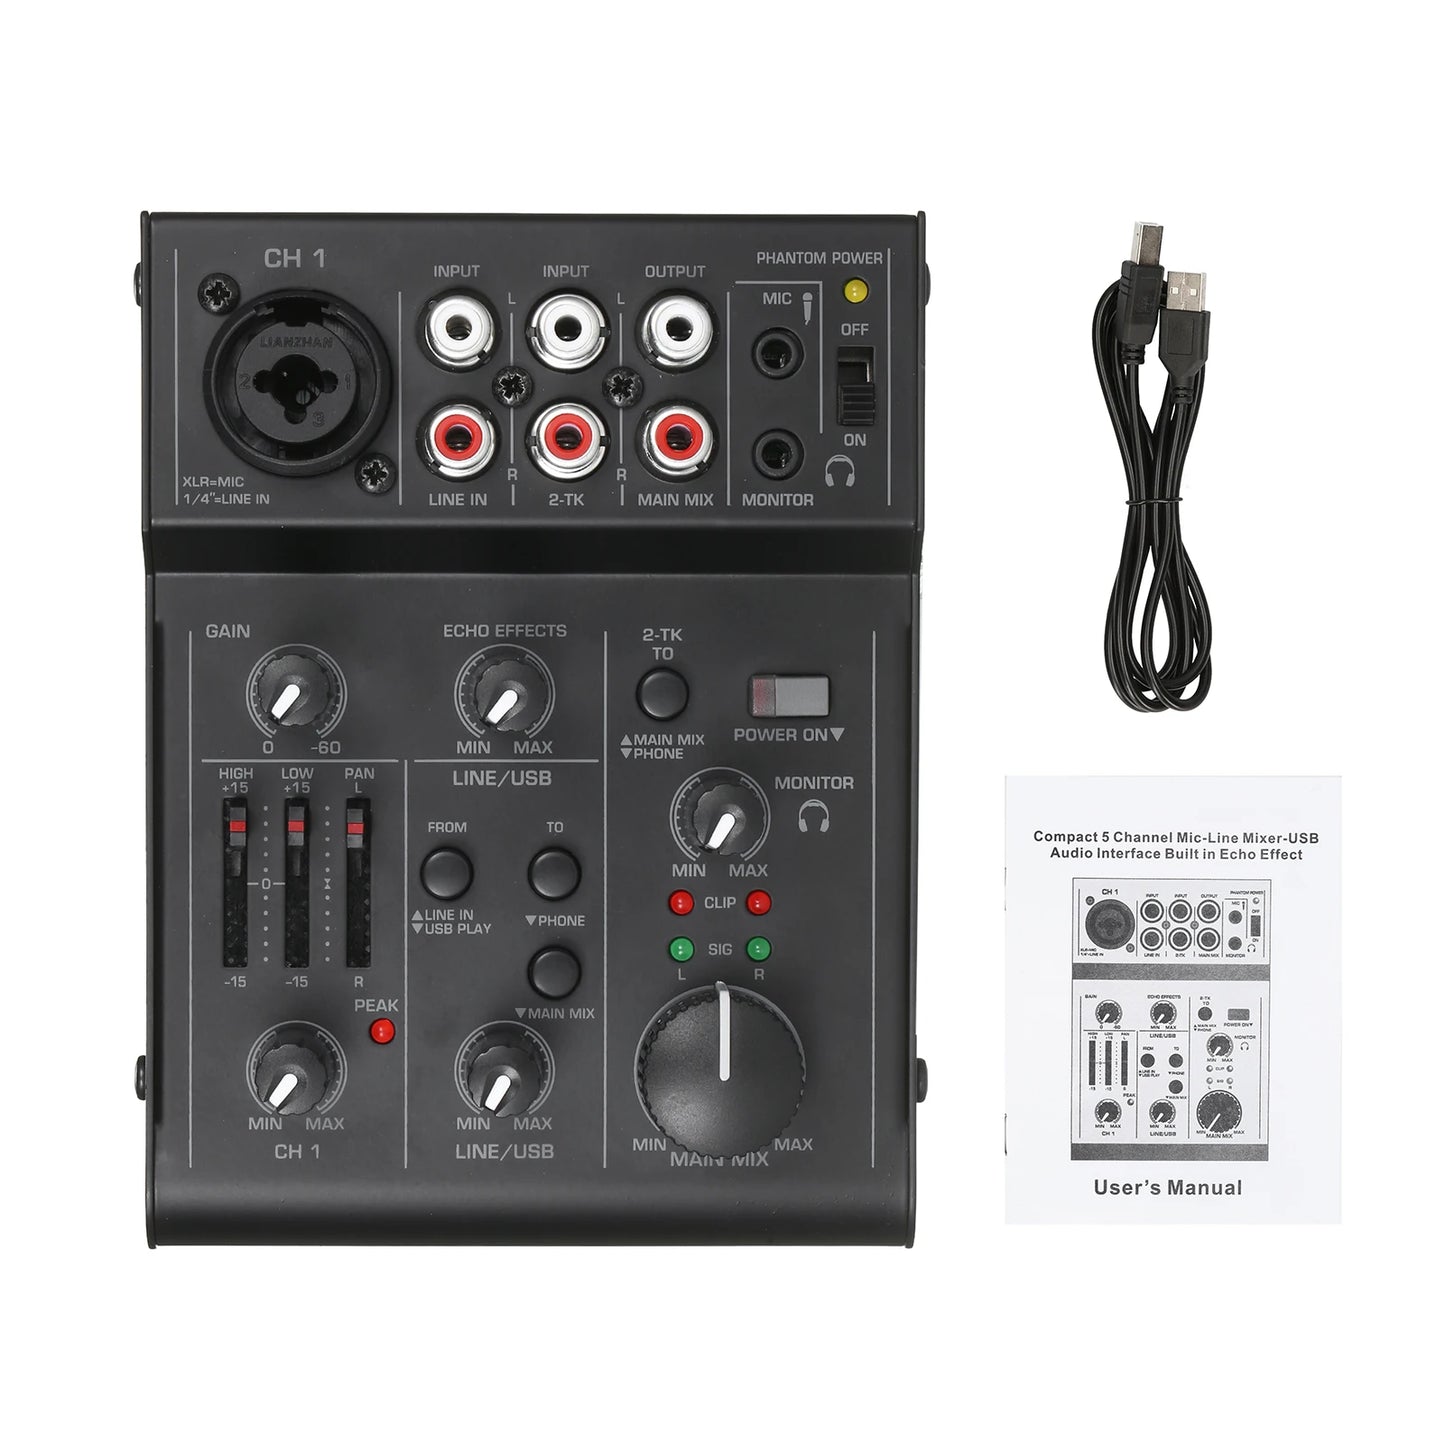 5-Channel Audio Mixer Sound Mixing Console USB Audio Interface 2-Band